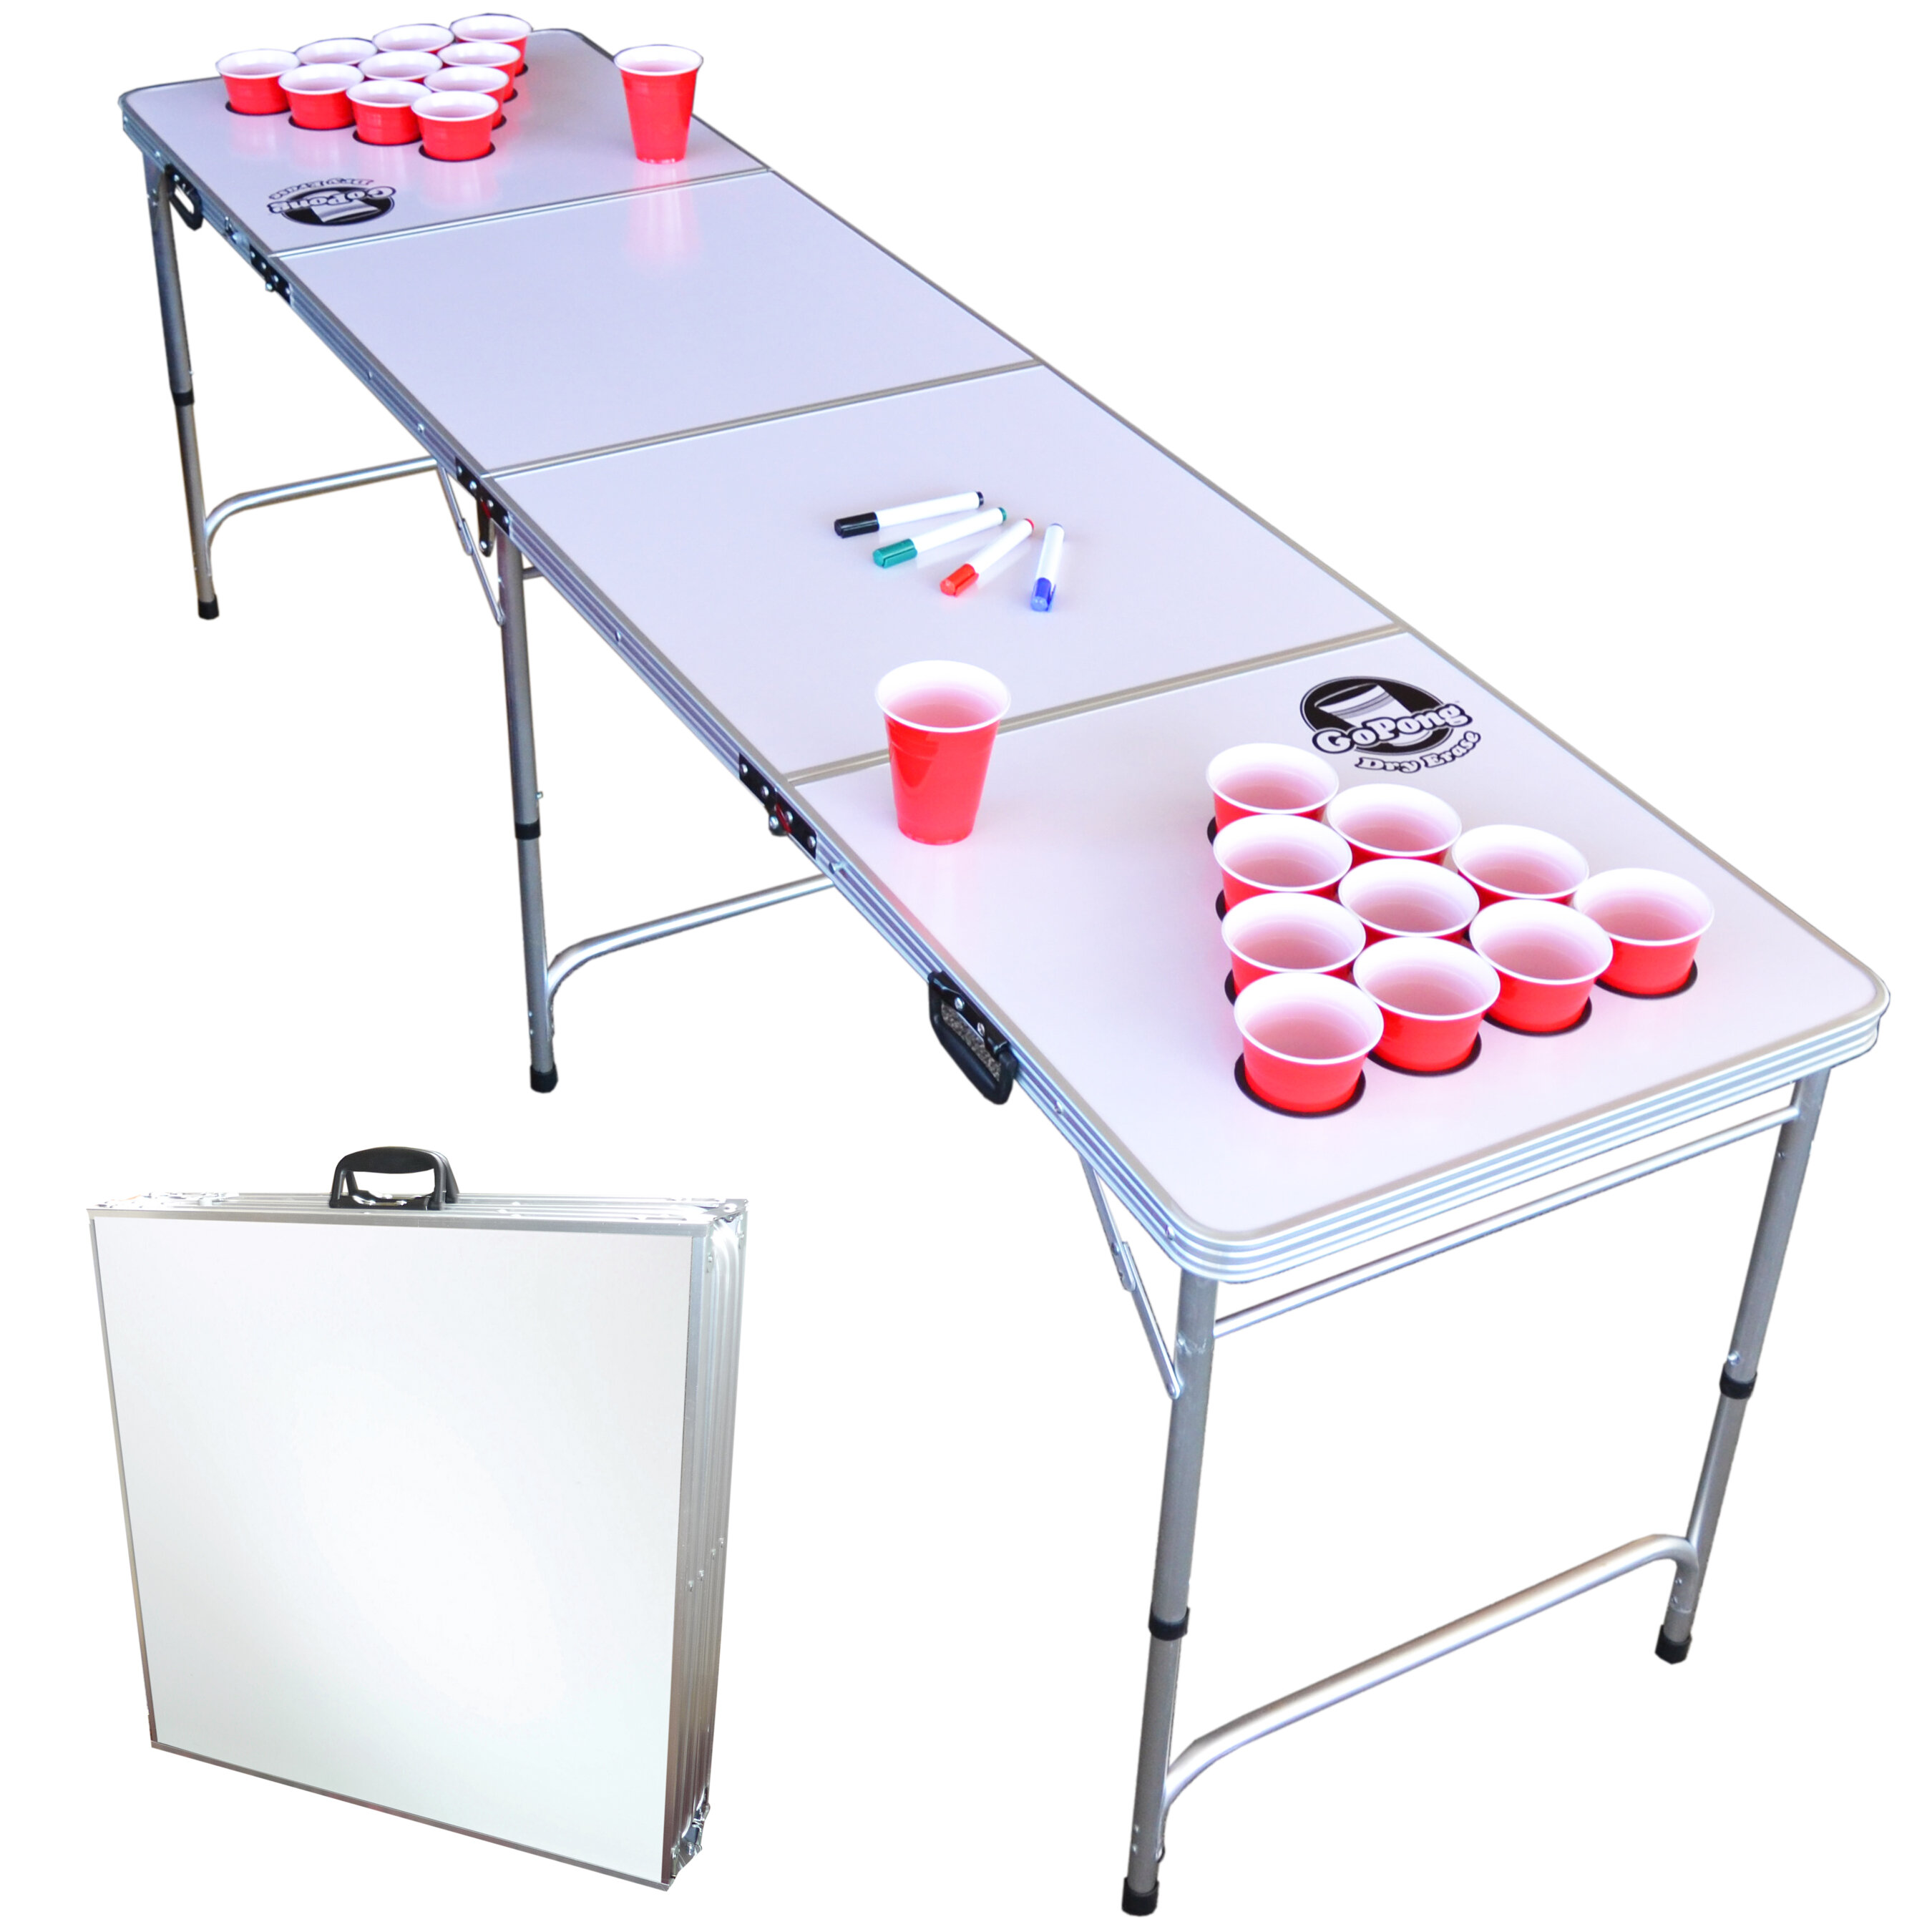 8-Foot Professional Beer Pong Table - Beer Pong Edition